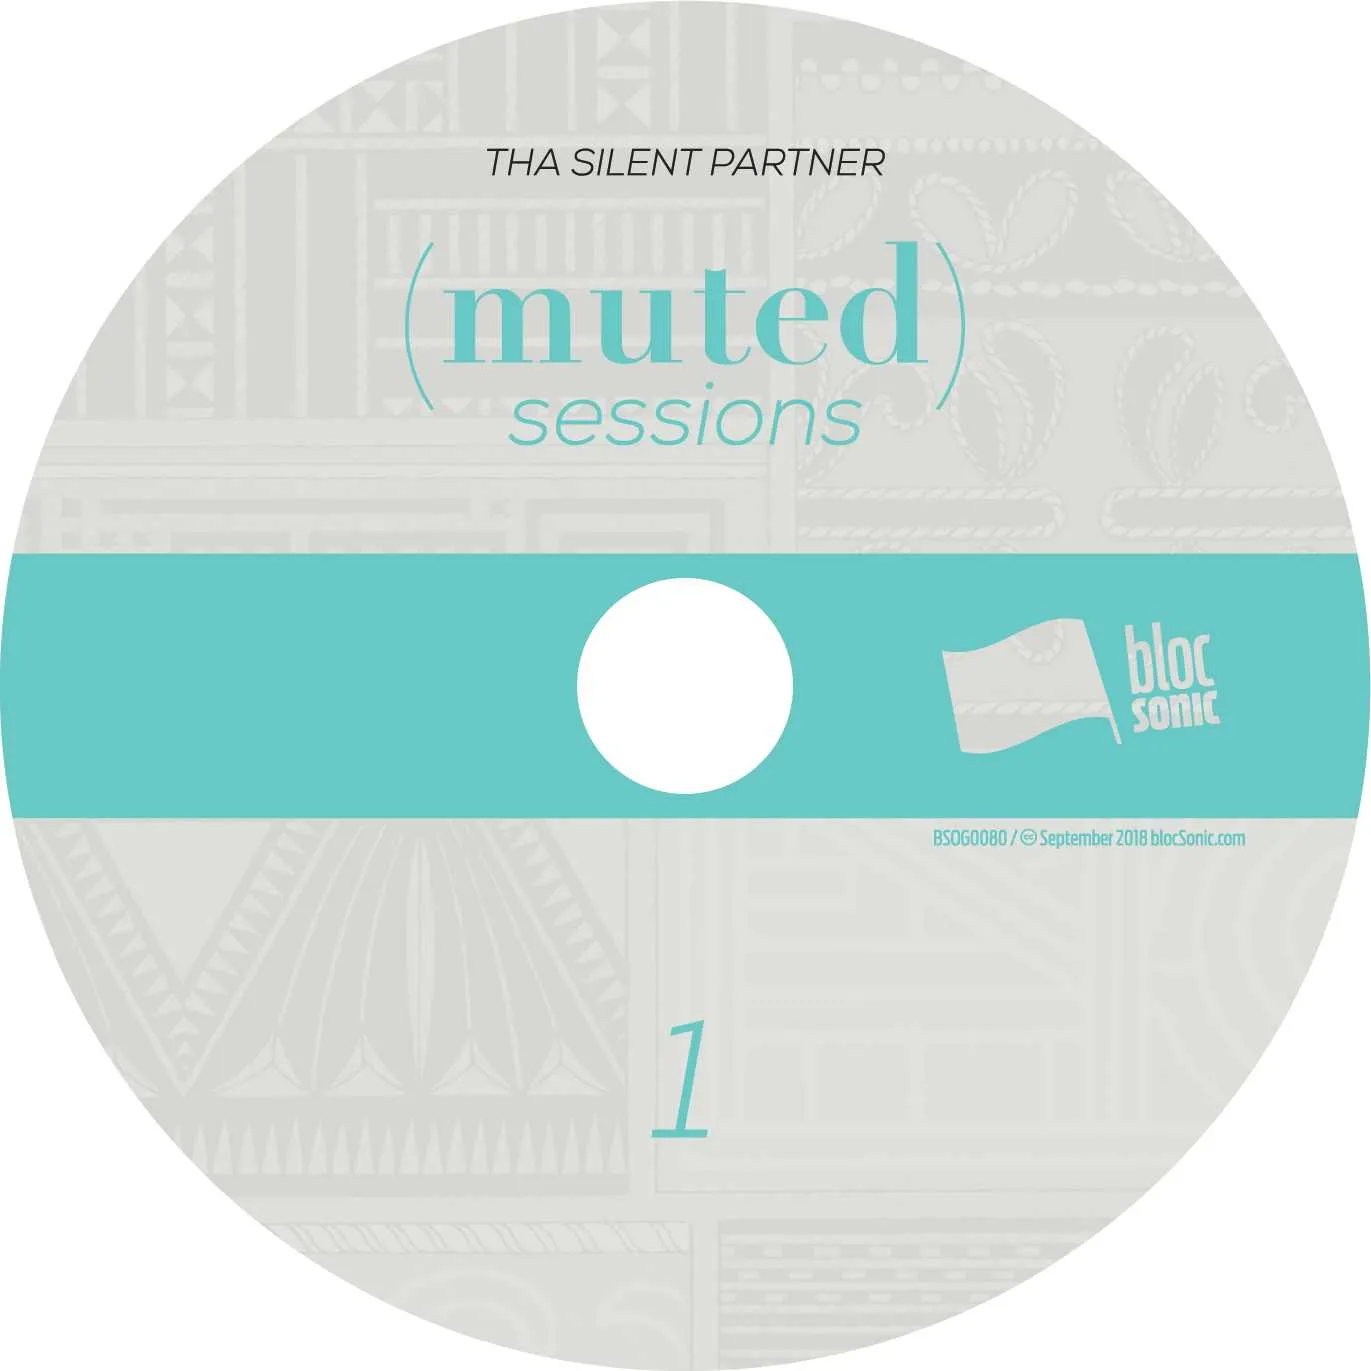 Album disc for “(muted) Sessions” by Tha Silent Partner